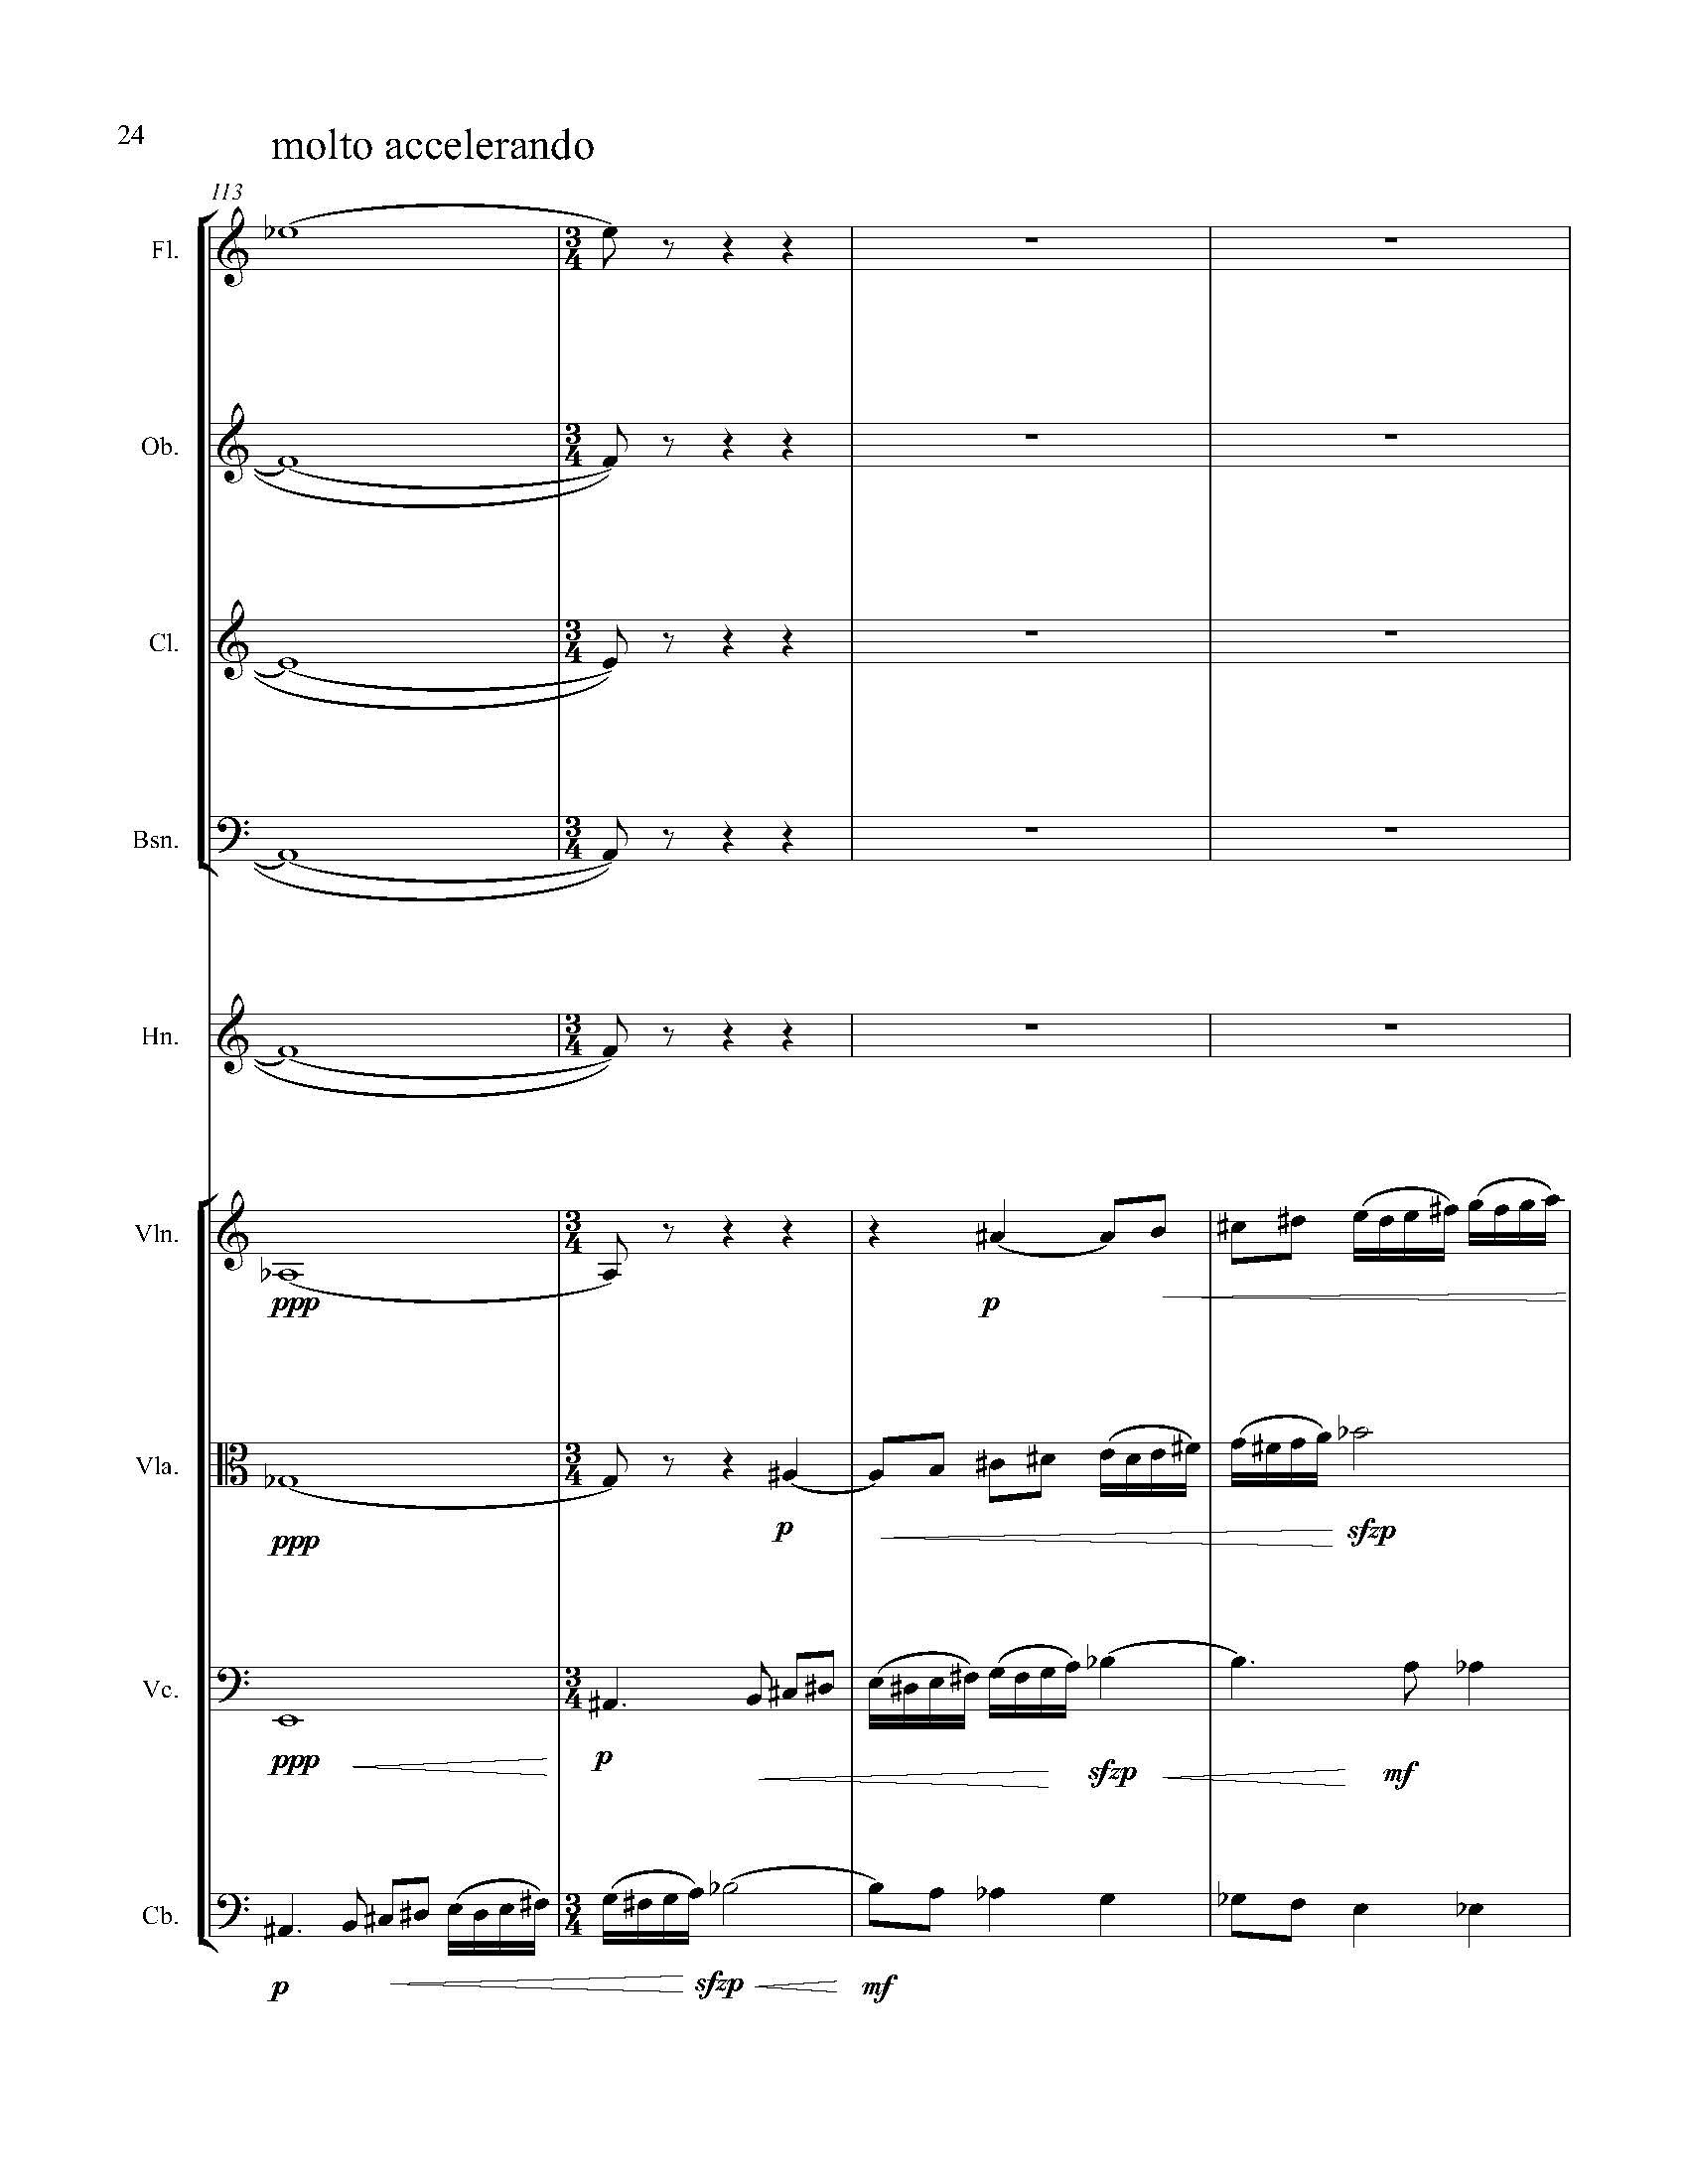 In Search of a Bird - Complete Score_Page_30.jpg